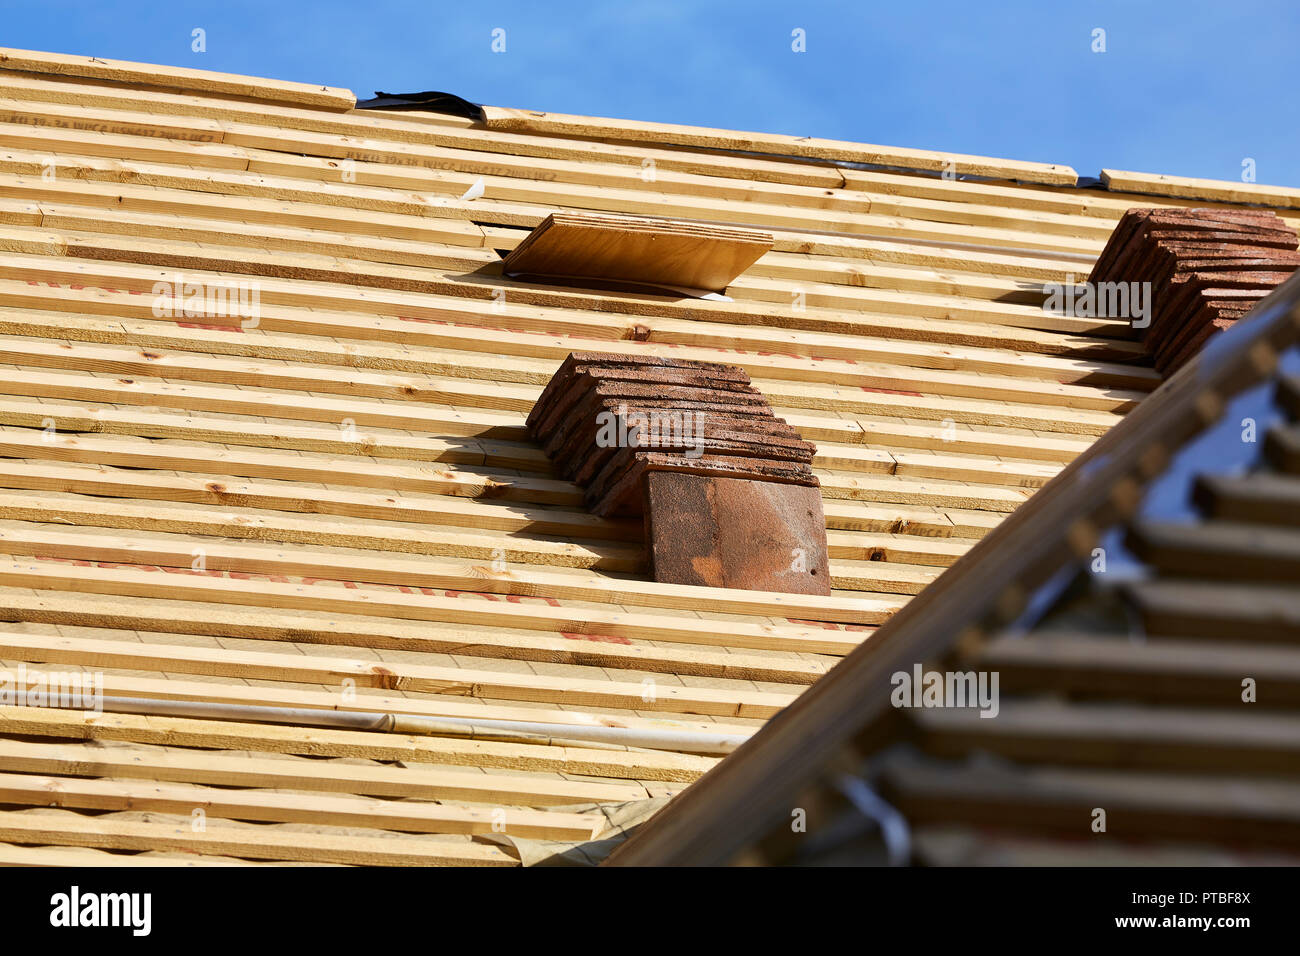 A number of roofing tiles stacked against tile batten on a roof waiting to be laid on an a new extension of a building Stock Photo